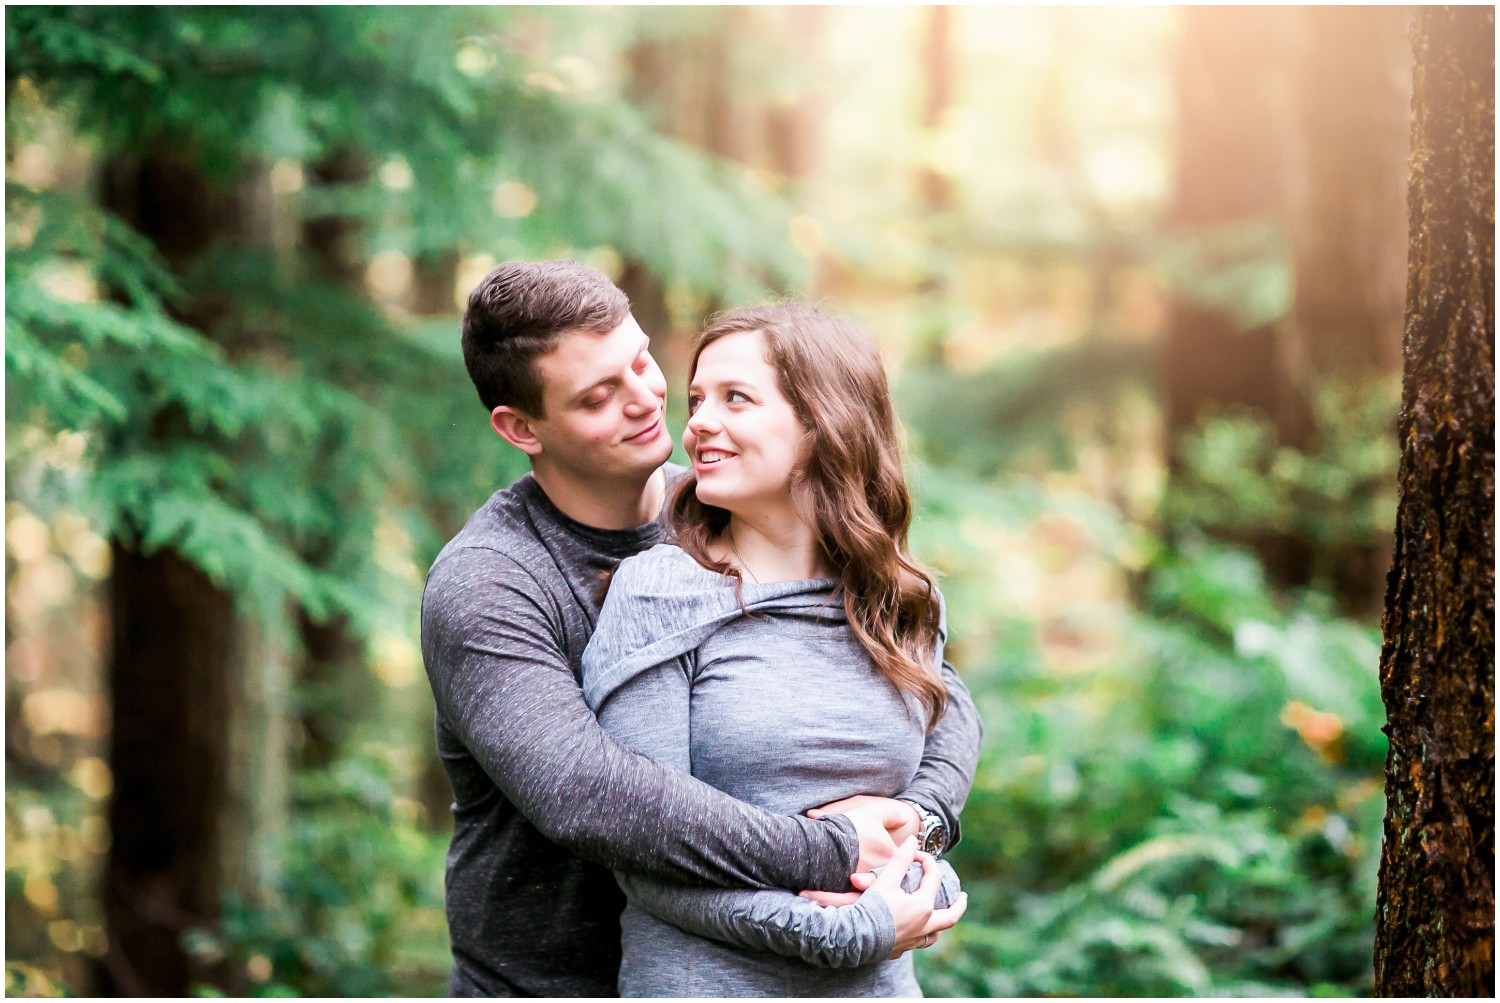 A Foggy Engagement Session at Forest Park